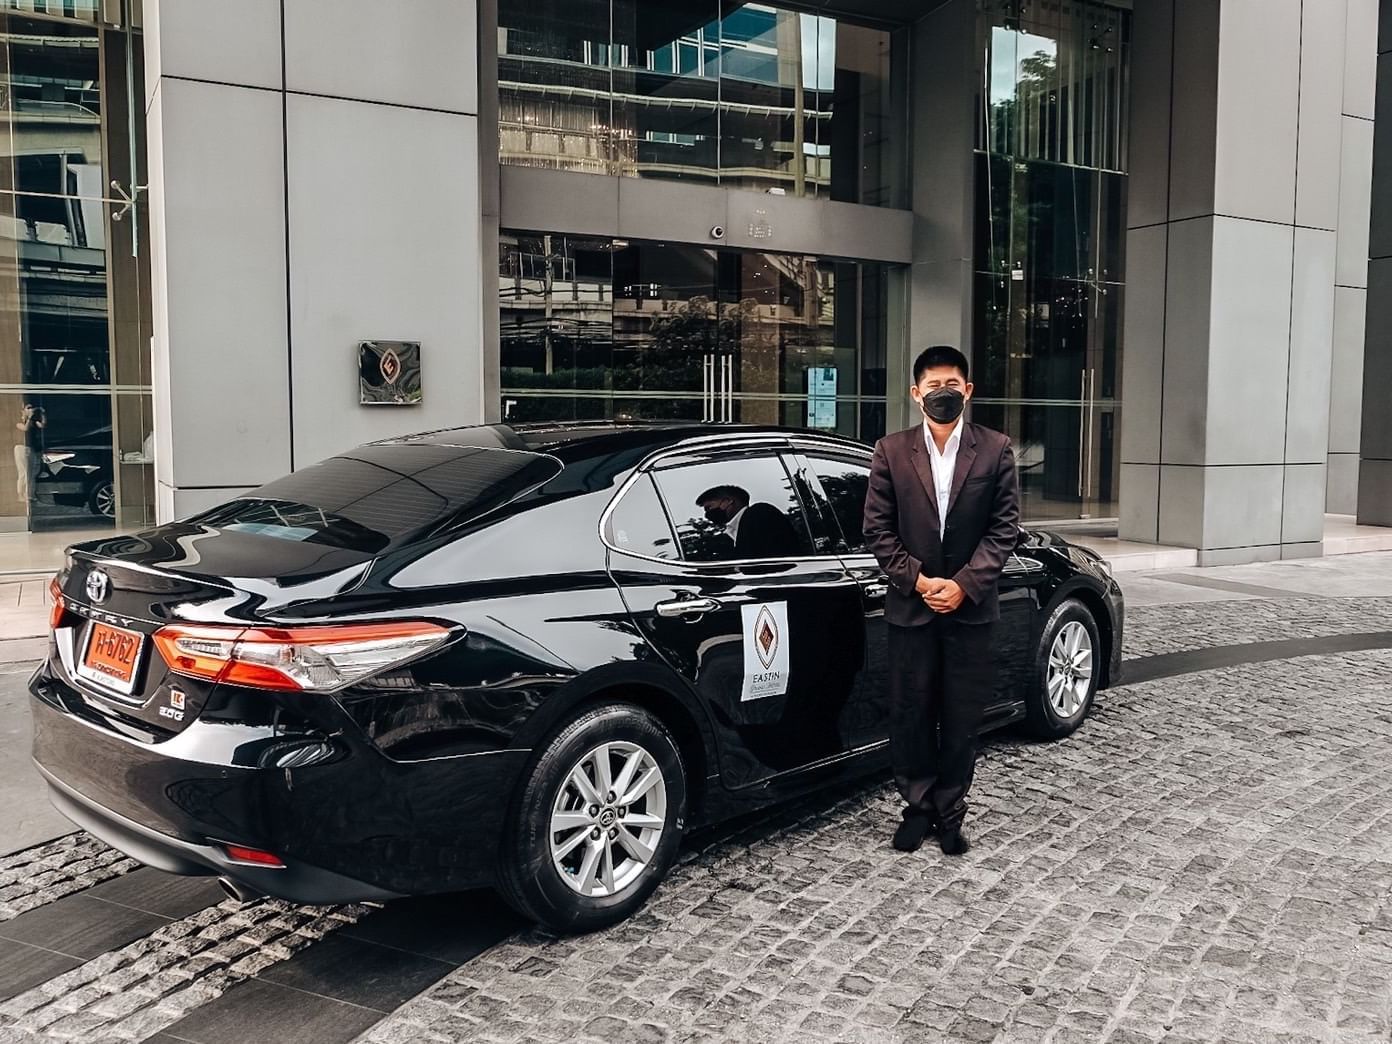 Chauffeur standing by the Limousine car at Eastin Hotels